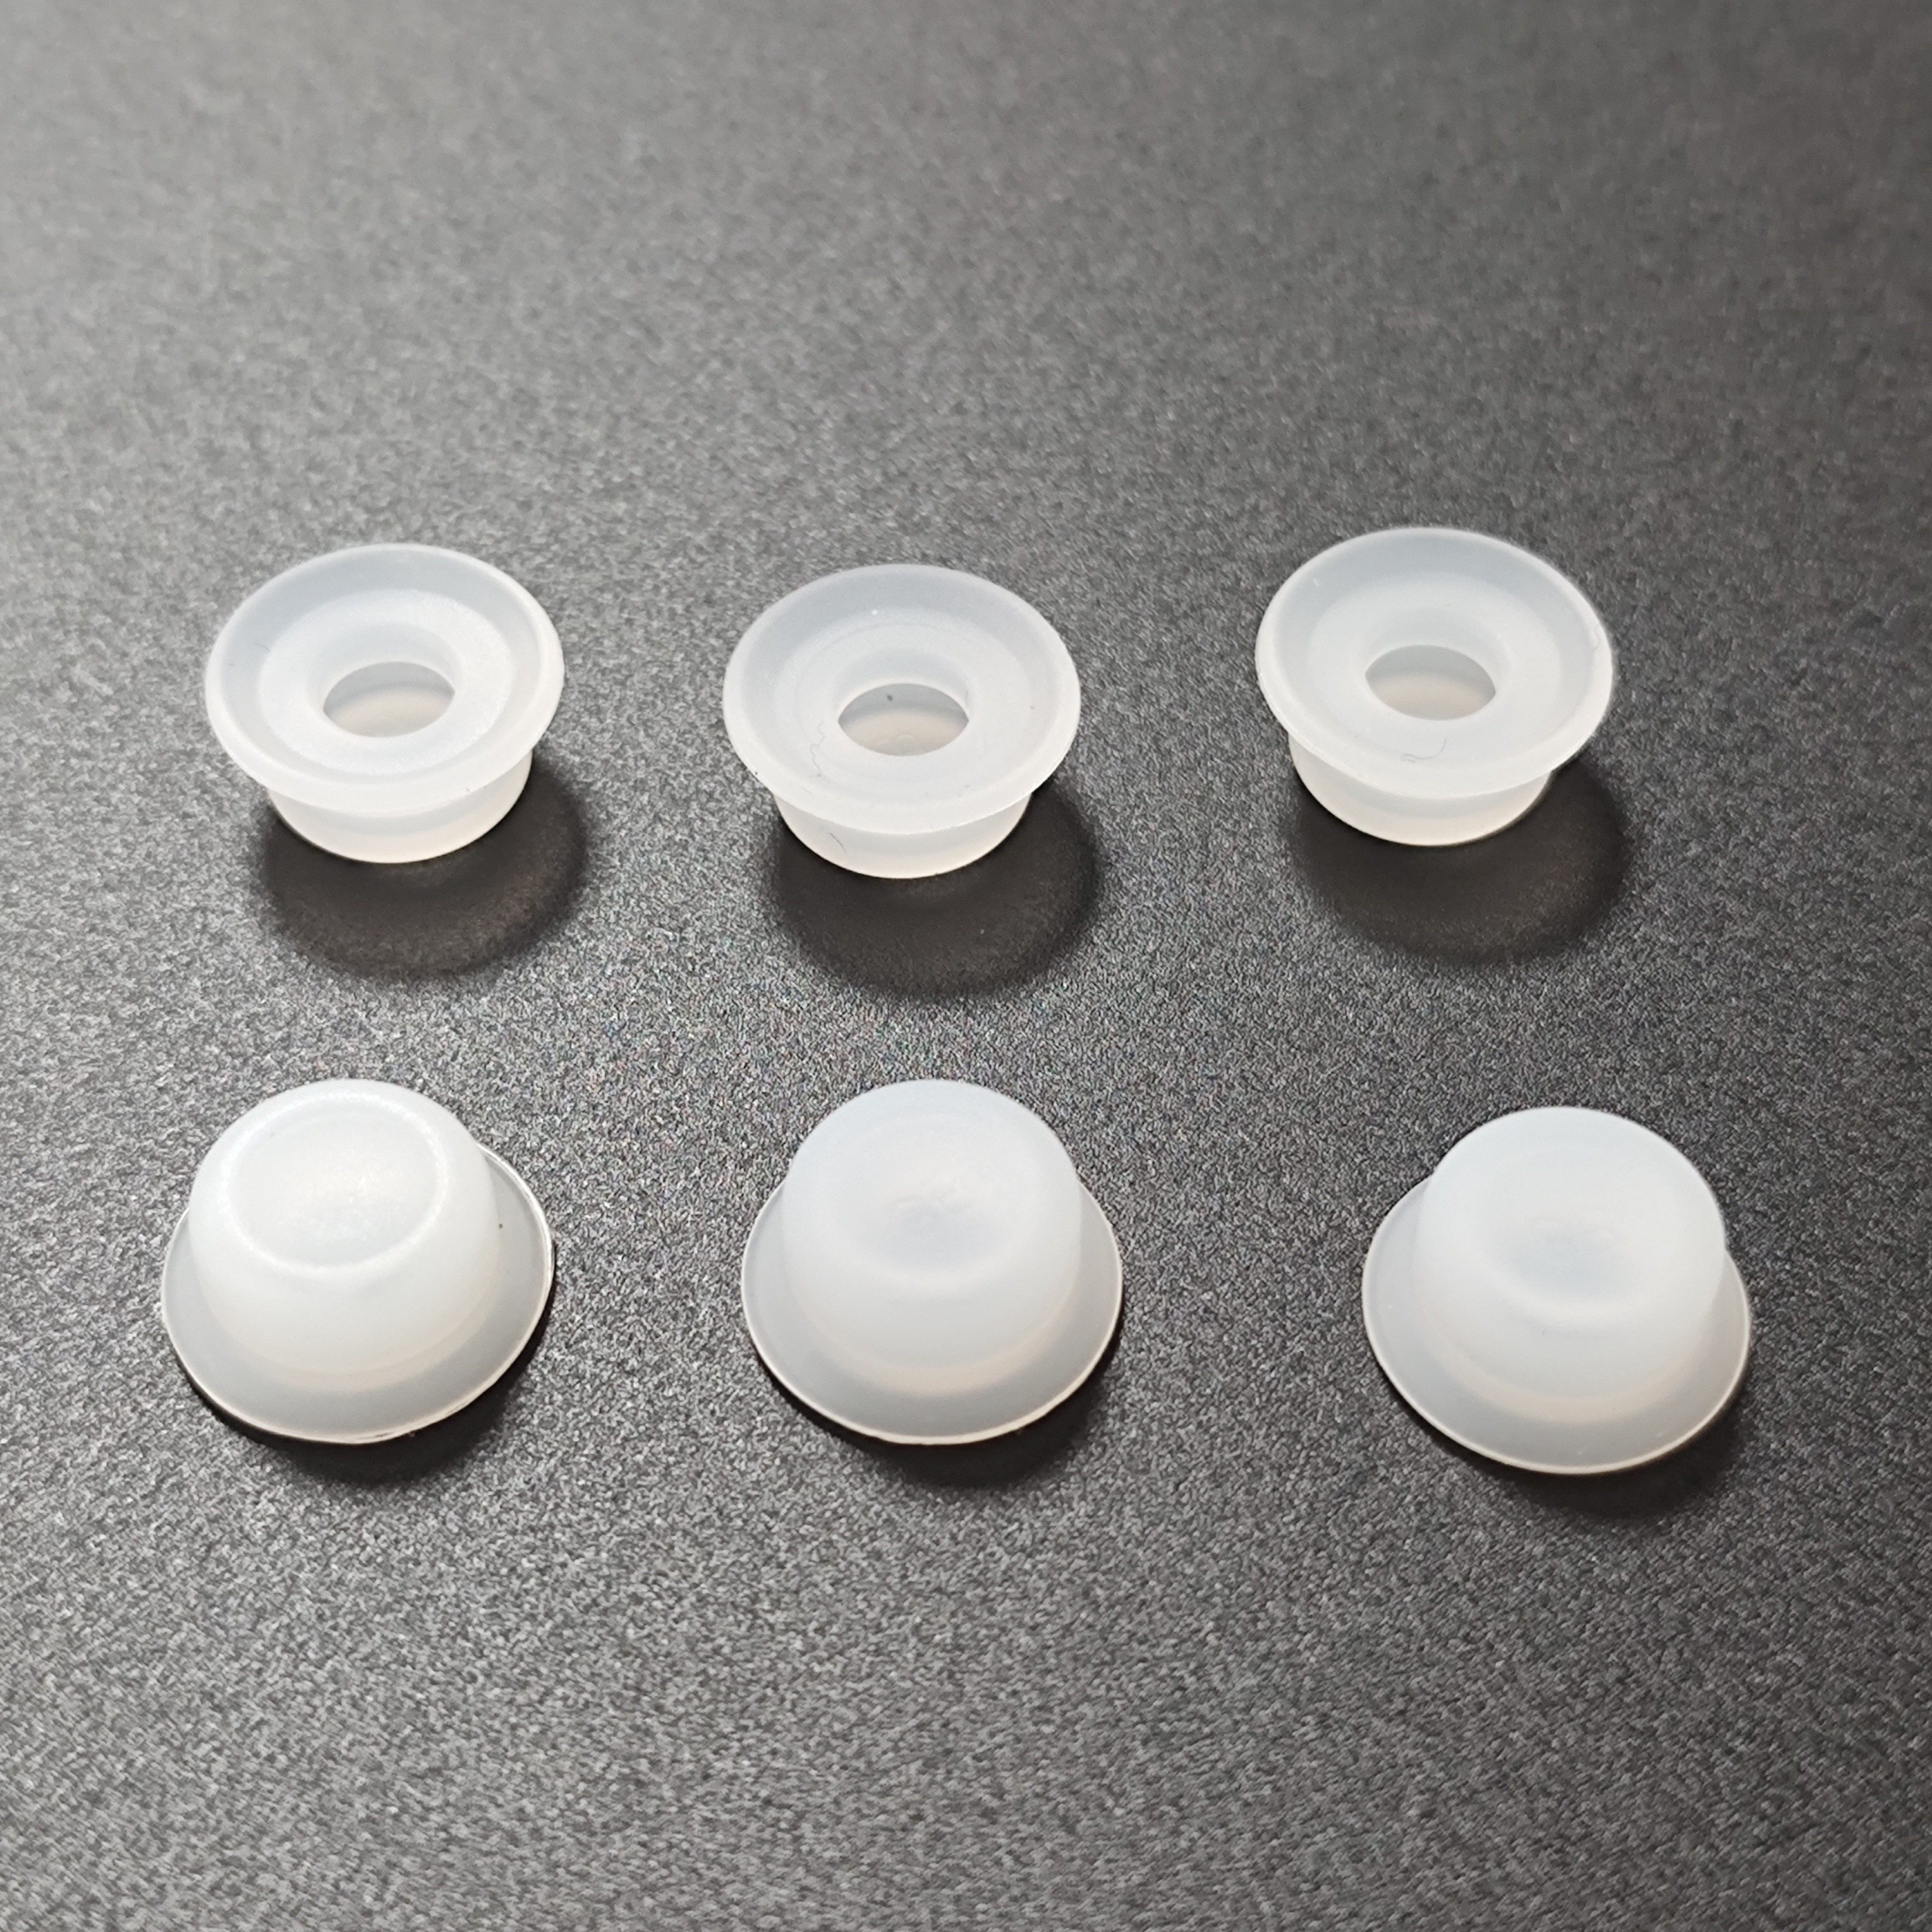 Release Handle Float Valve Replacement Parts With 3 Silicone Caps